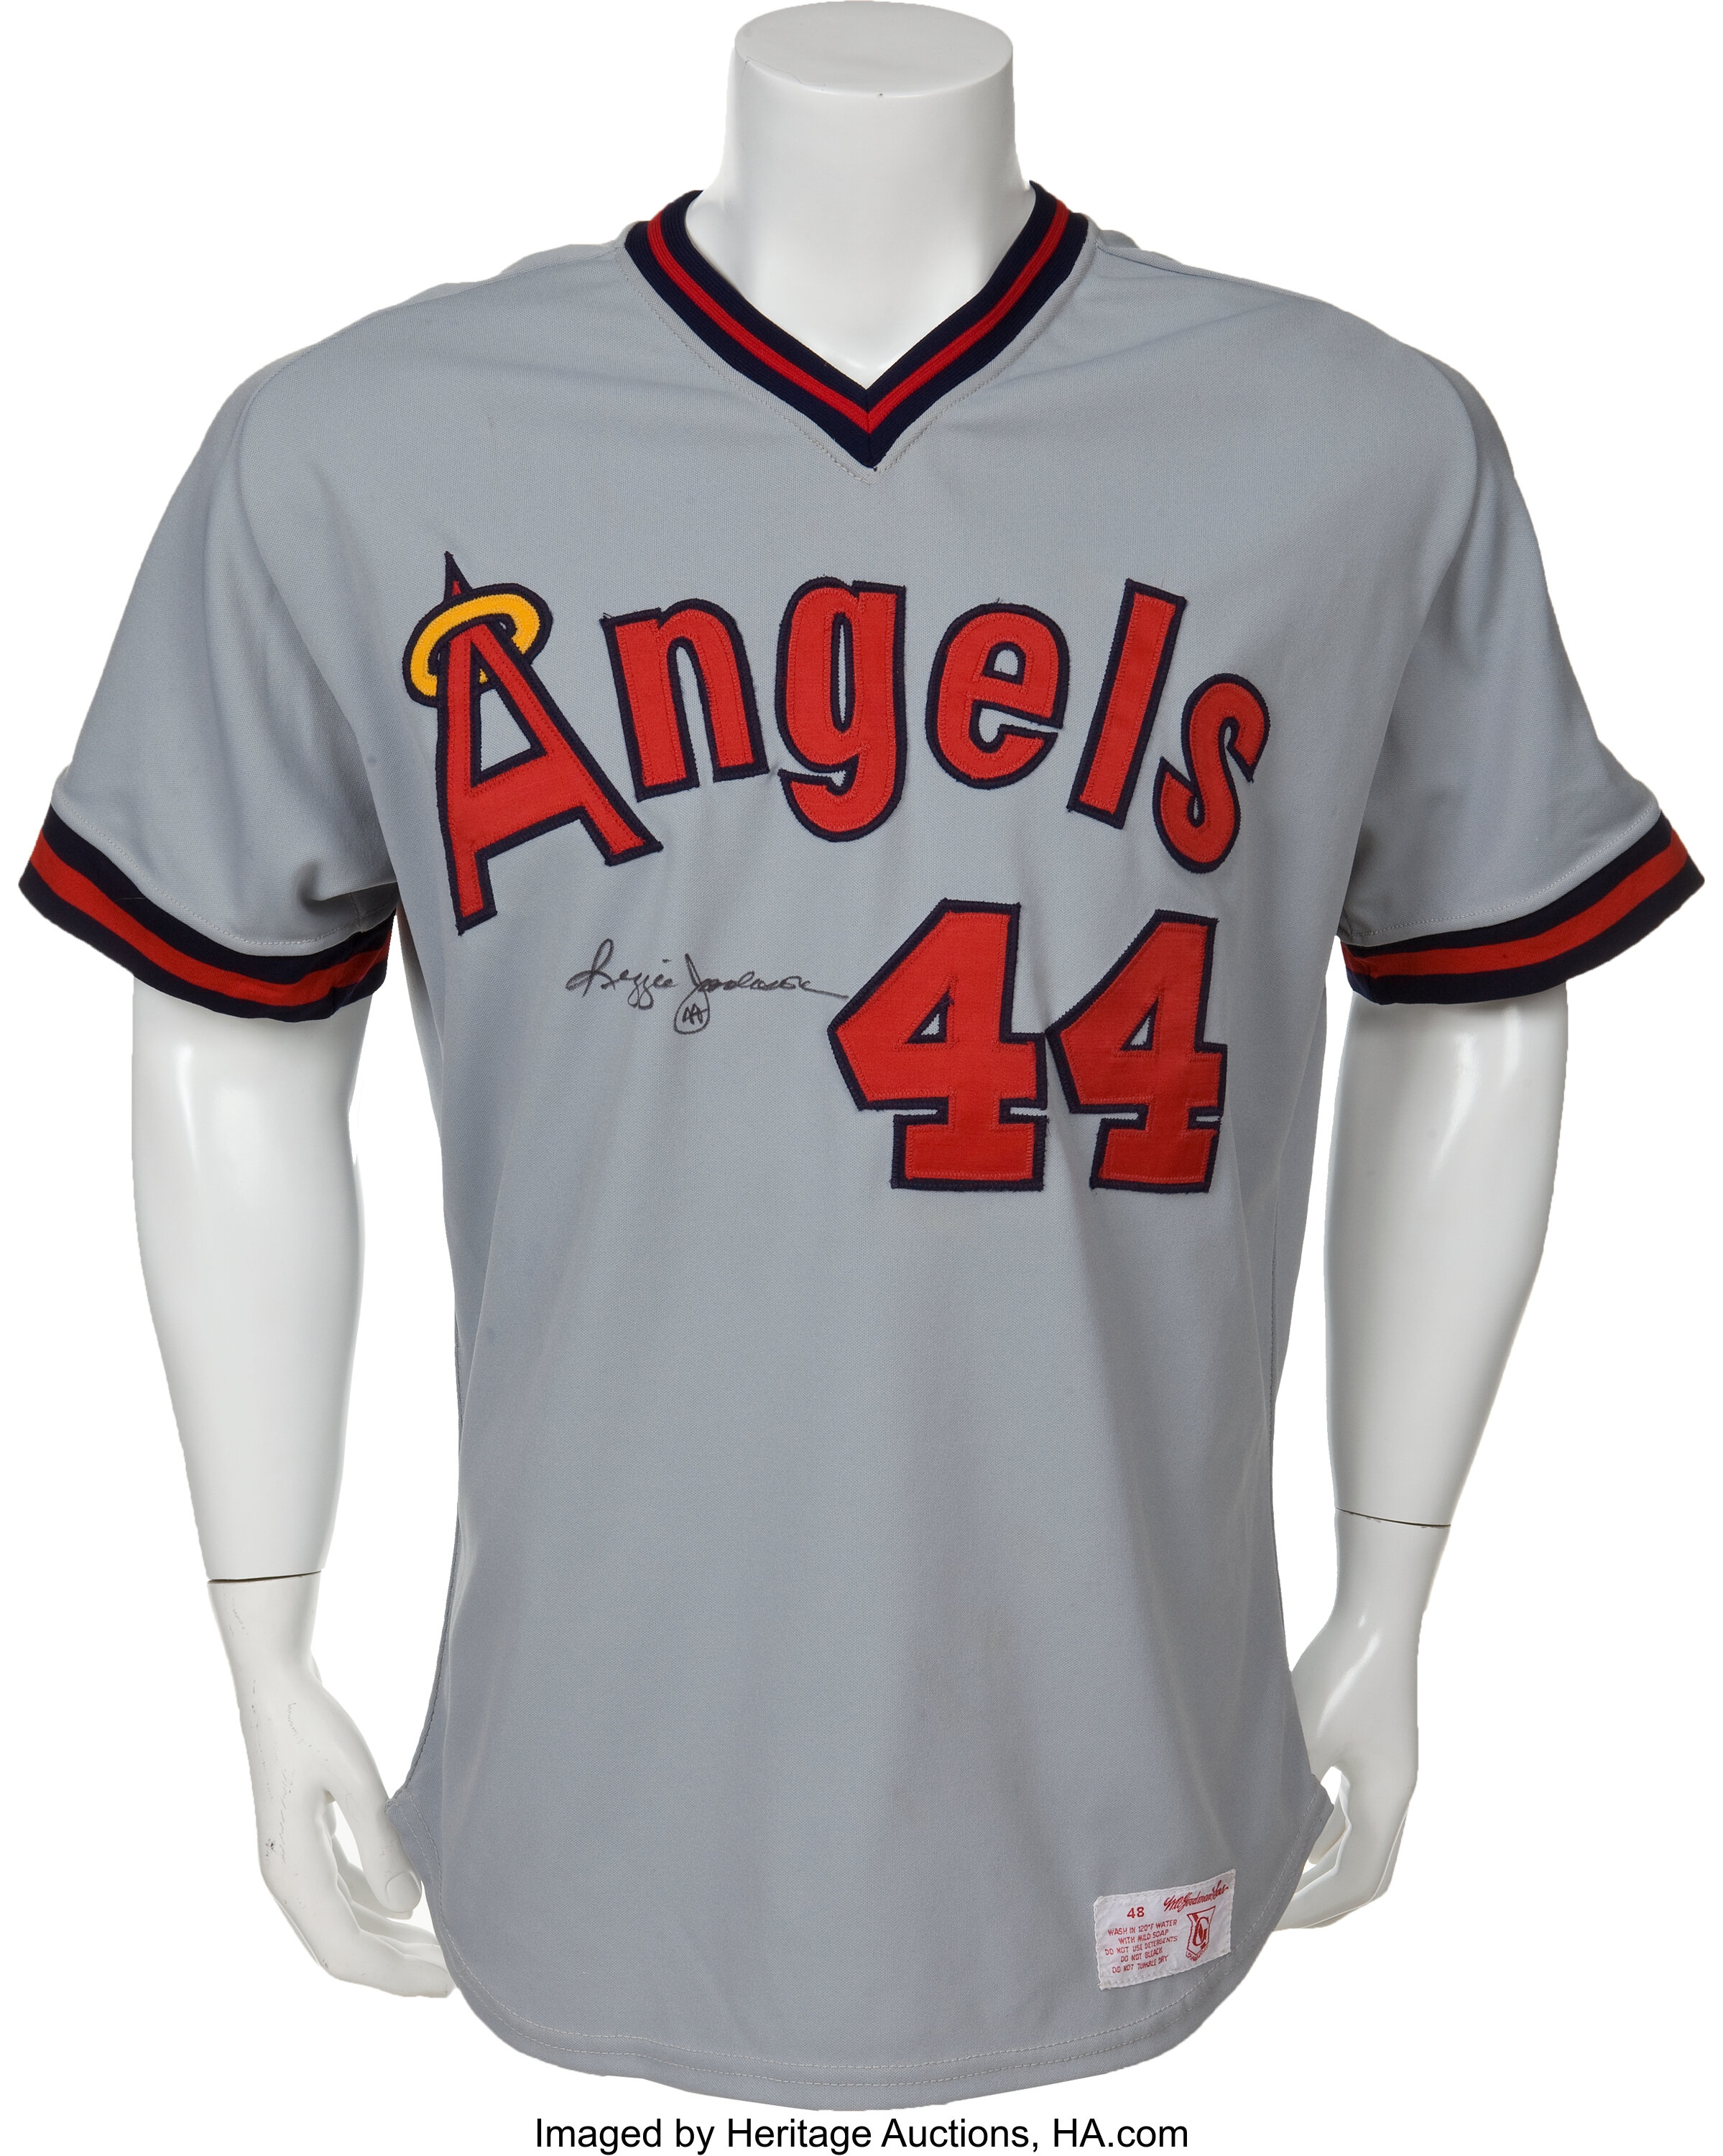 Vintage California Angels Baseball Jersey Red Button Front 